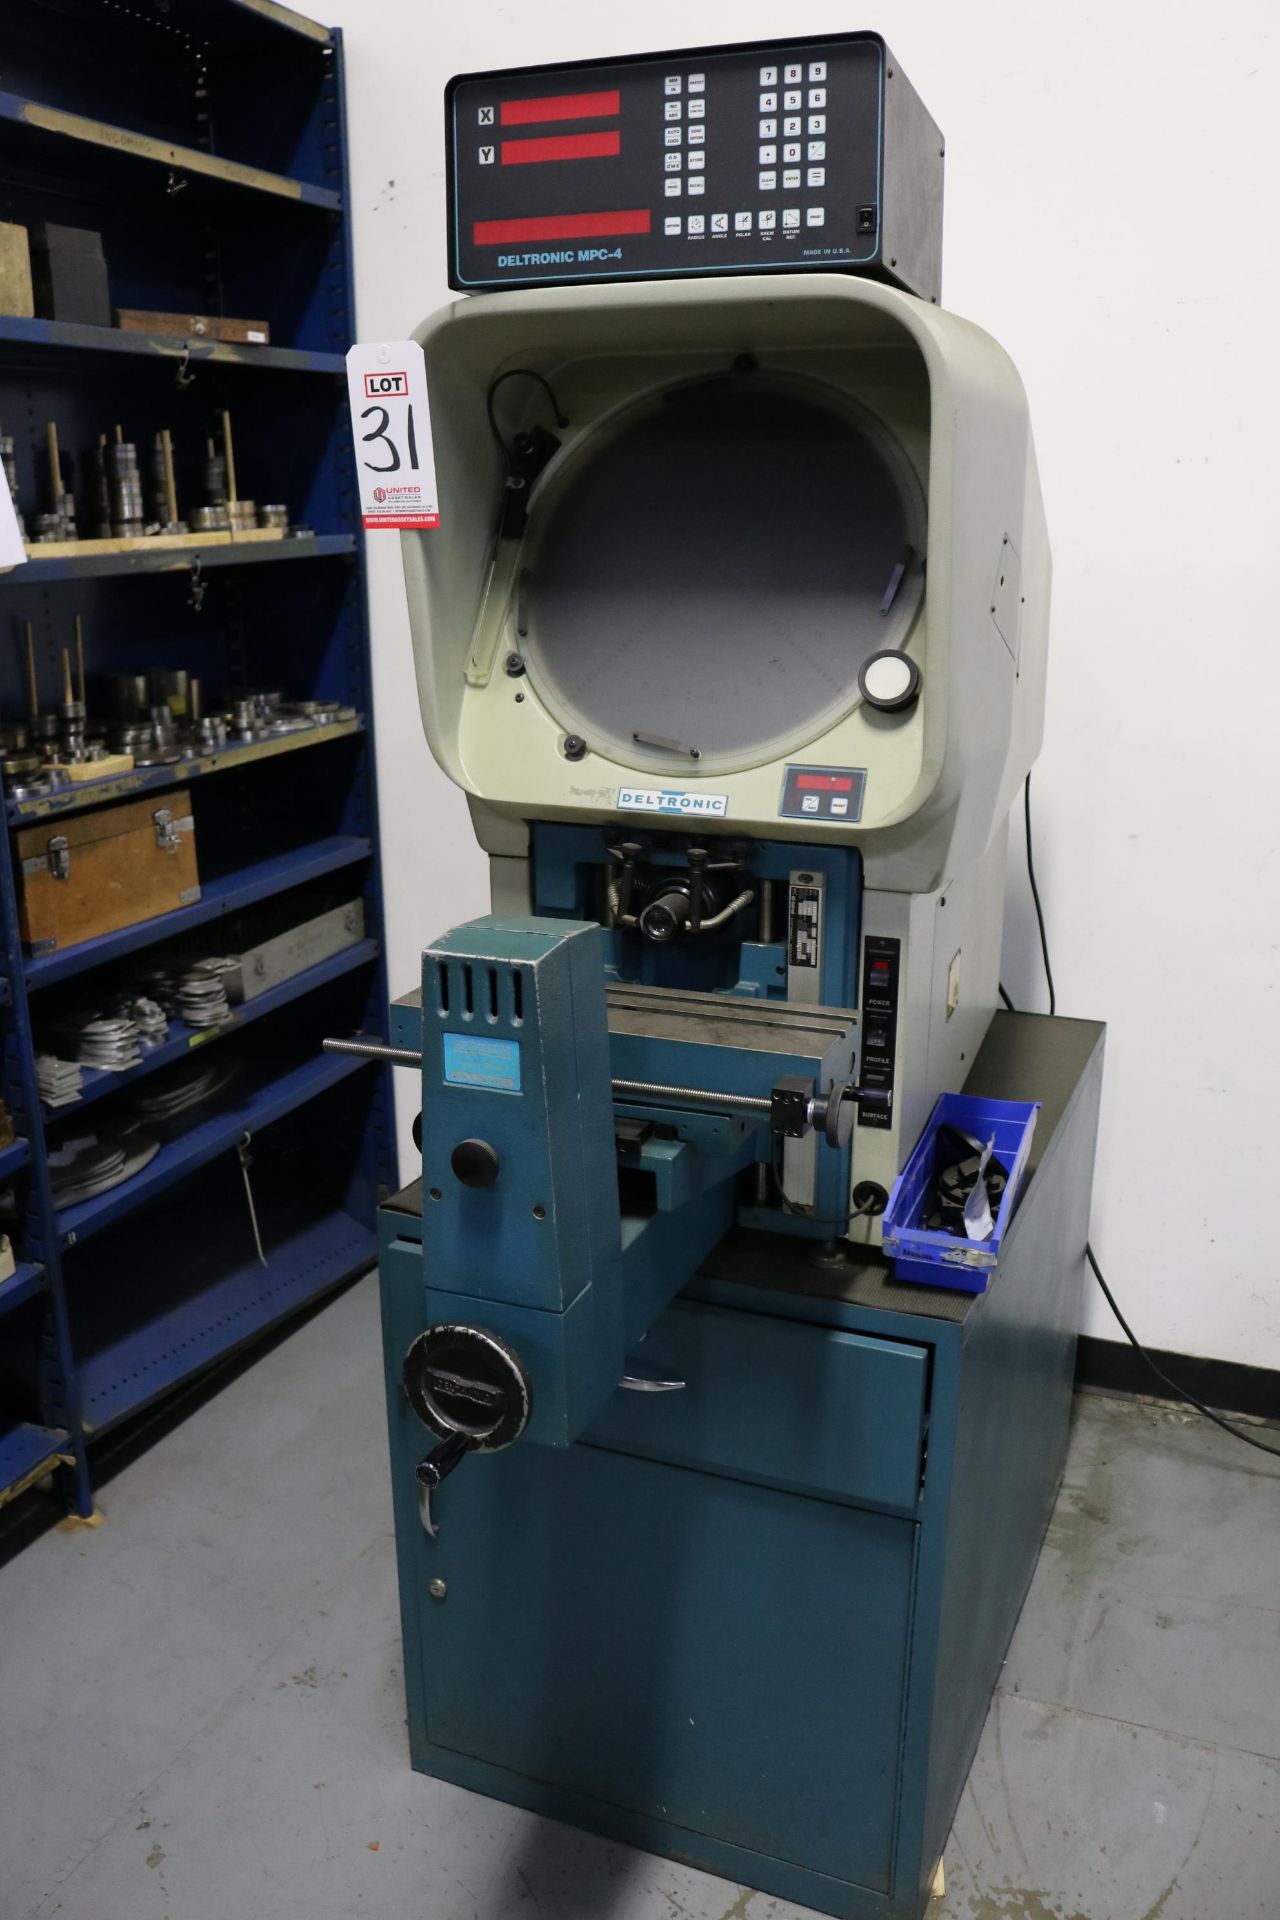 DELTRONIC DH14 OPTICAL COMPARATOR